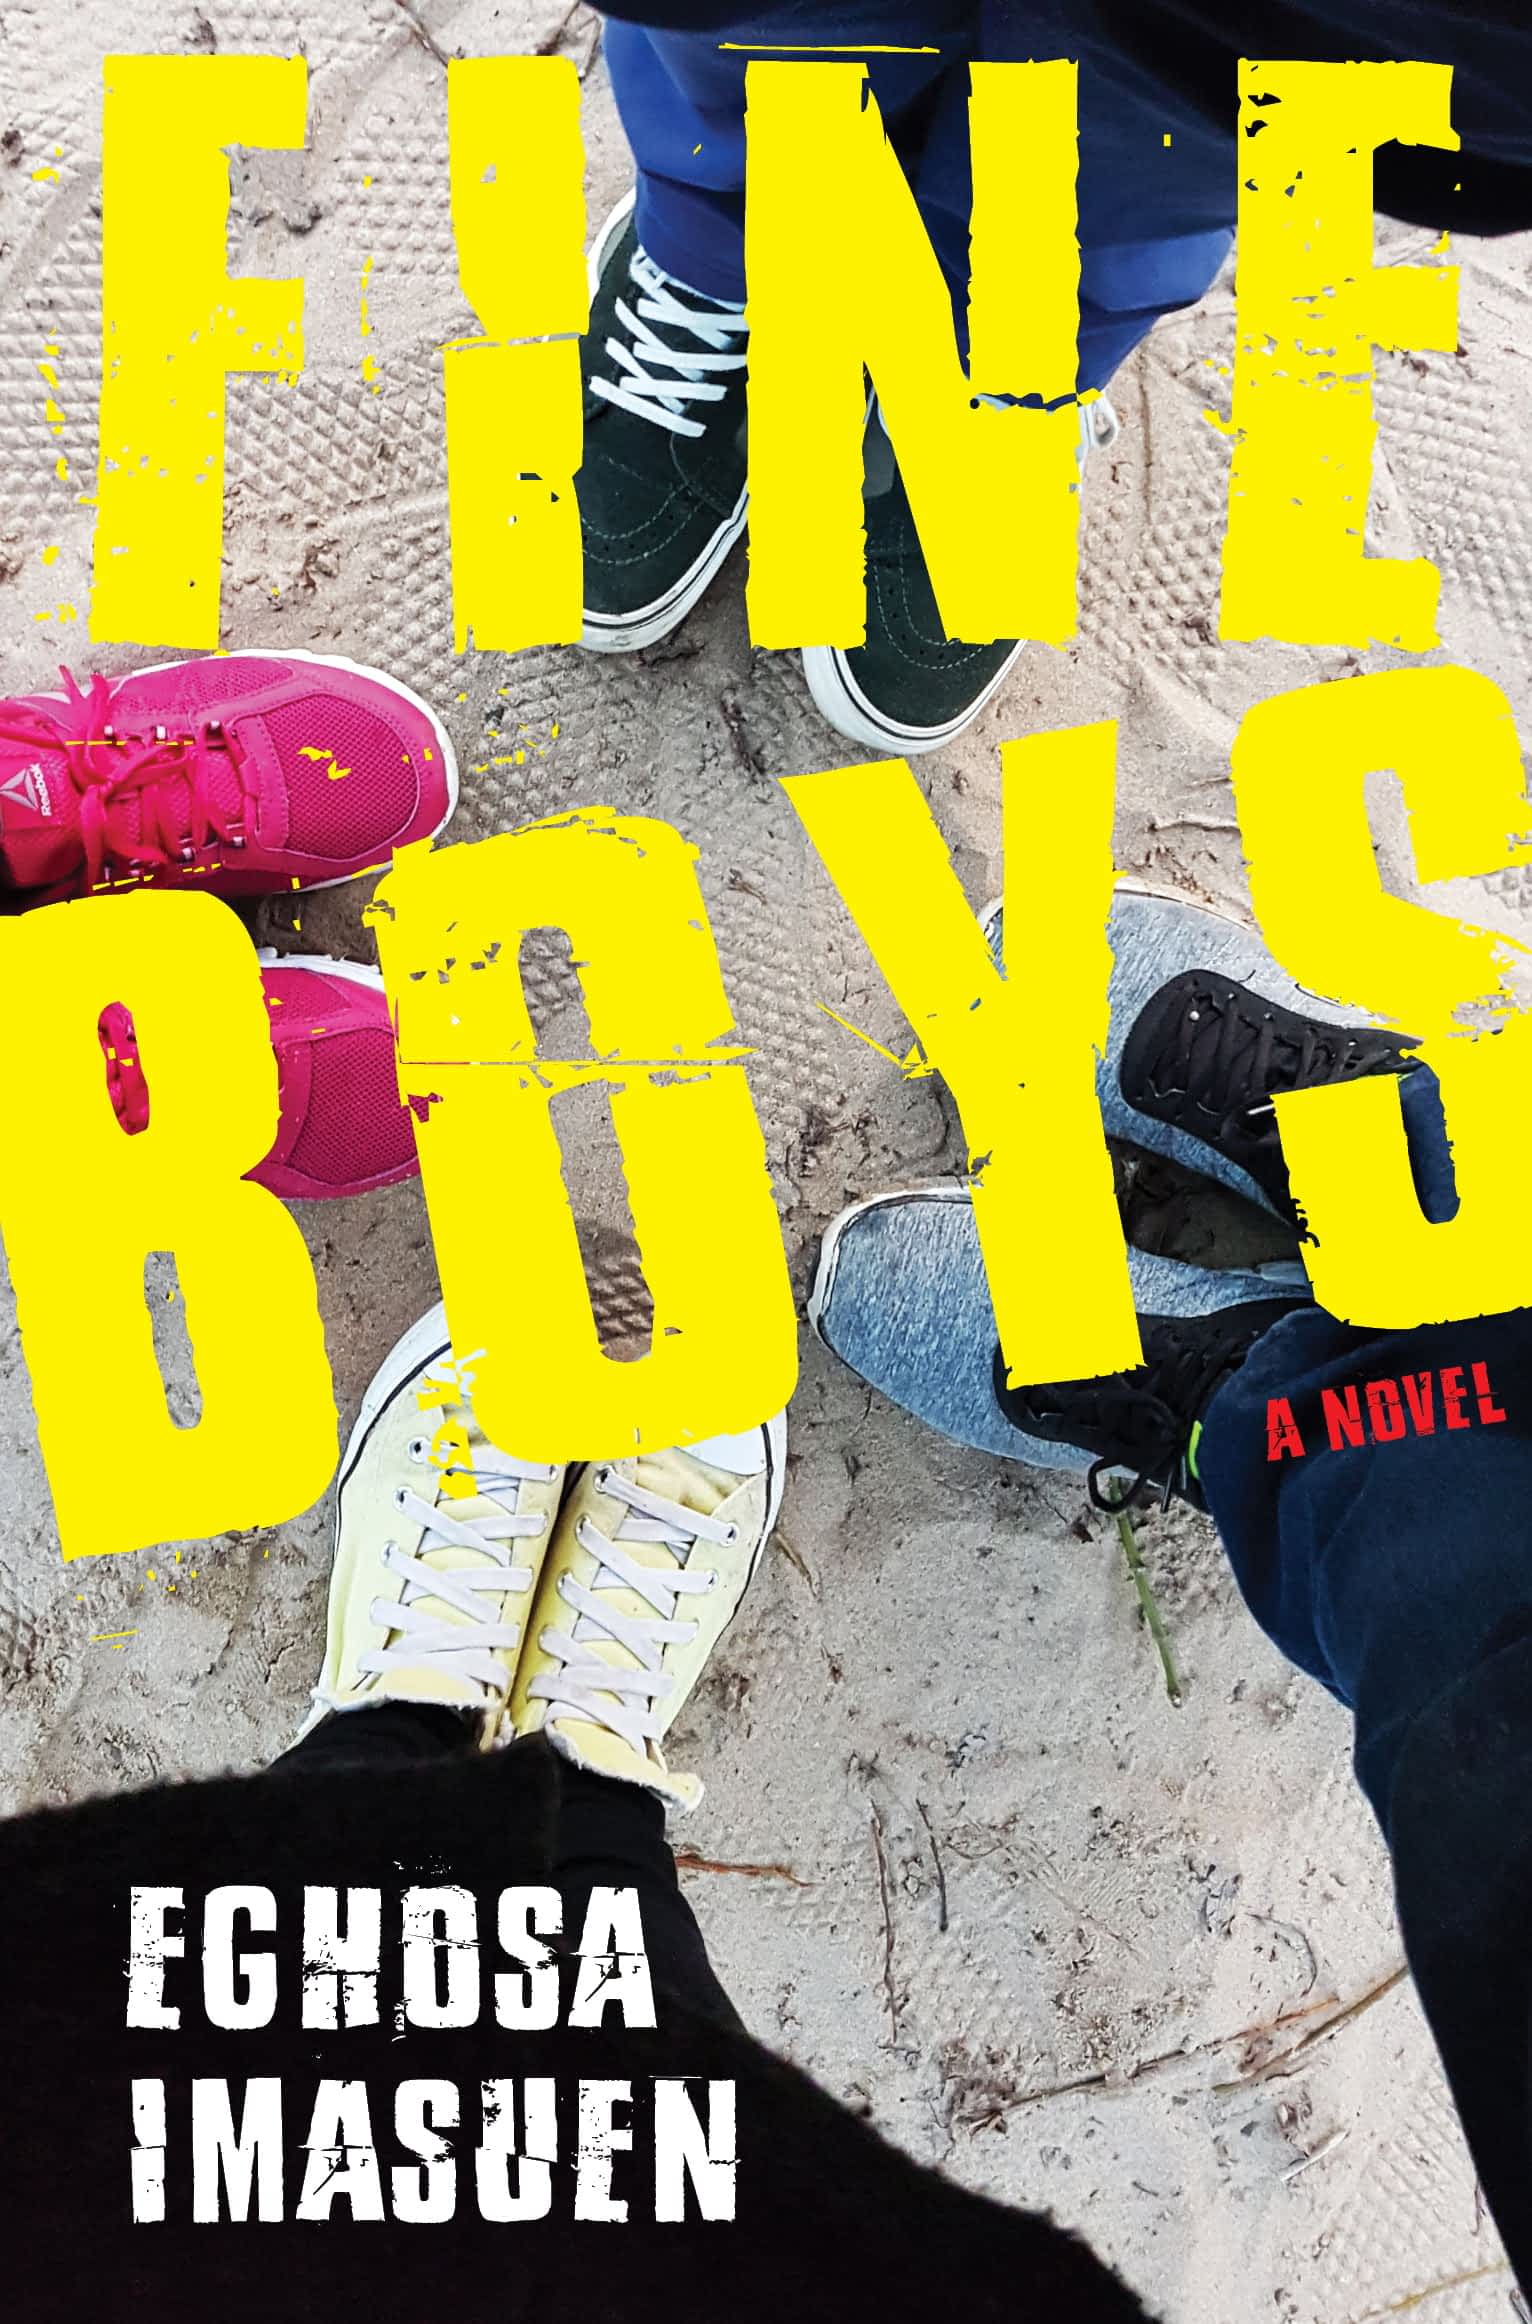 fine boys revised African Books Publishers